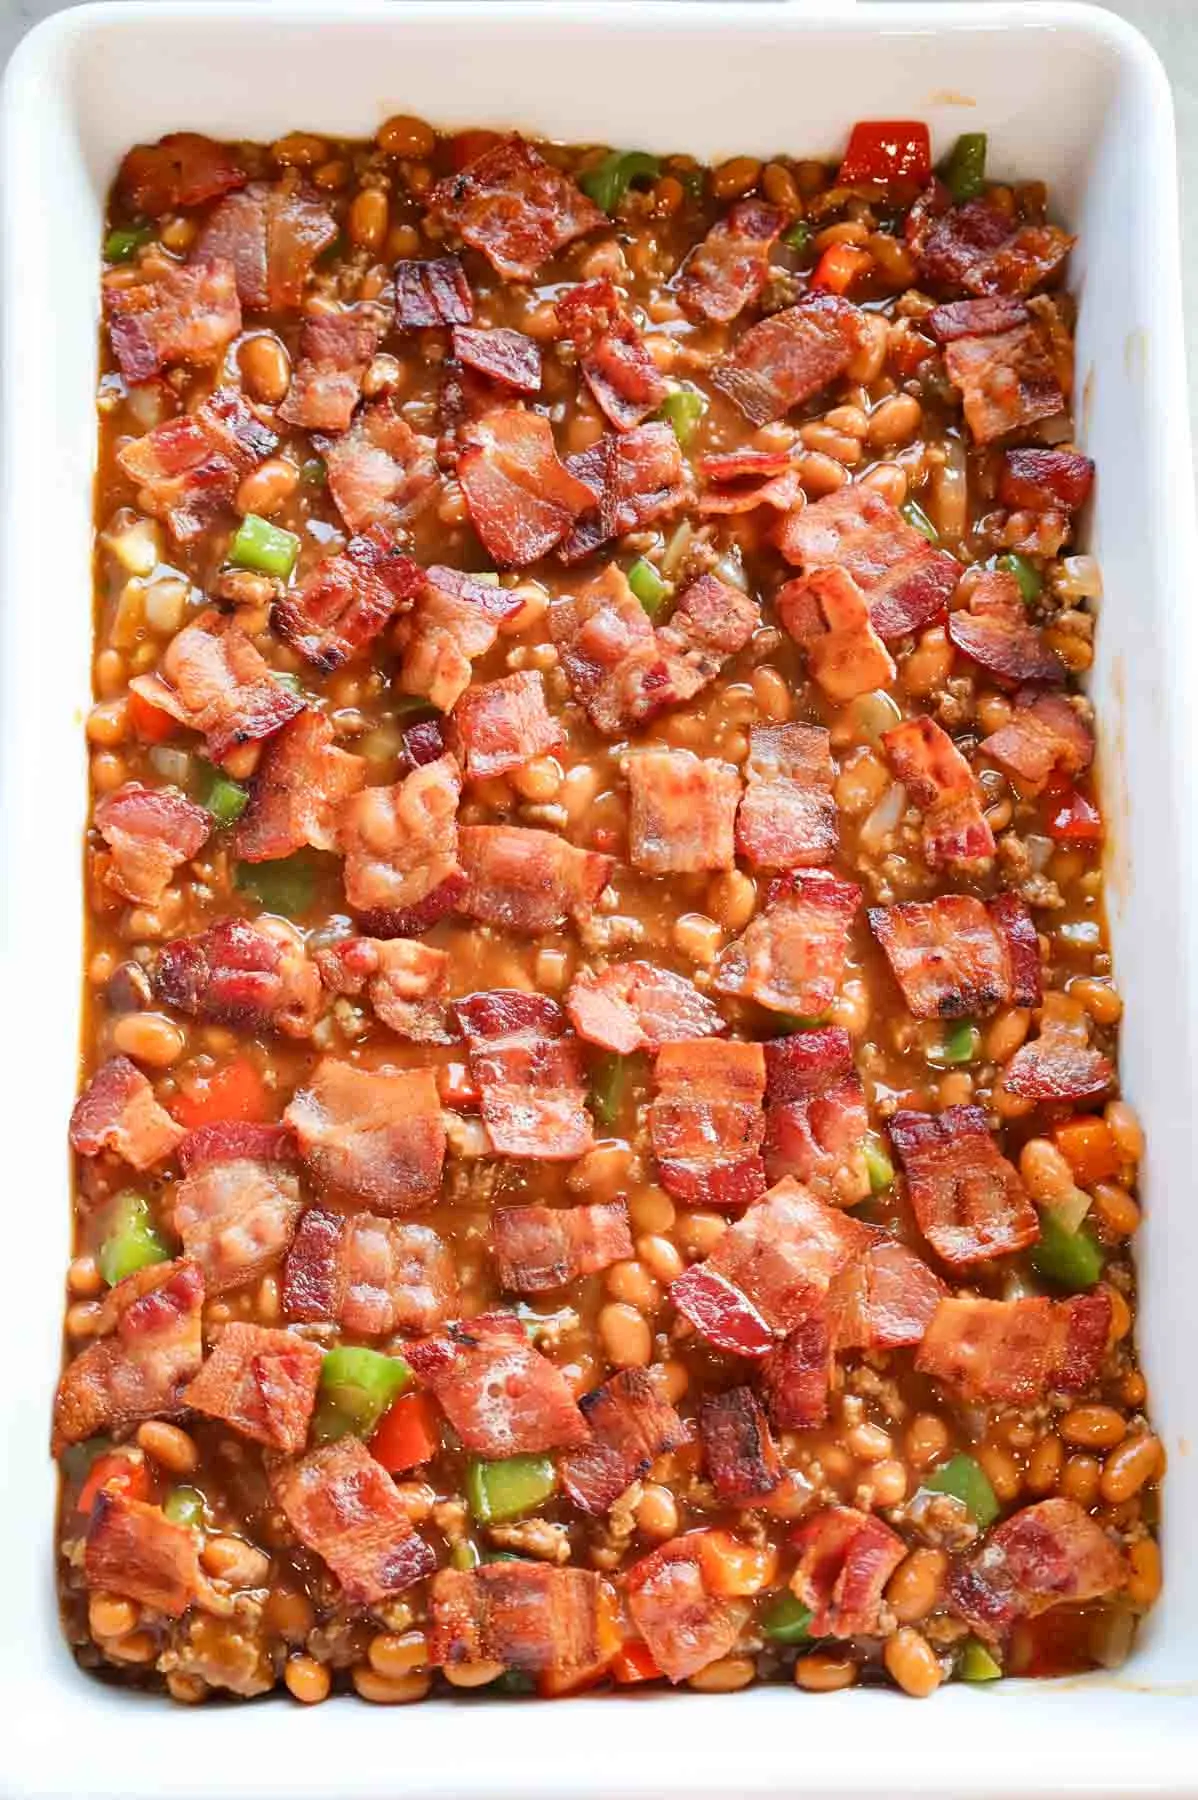 cooked bacon pieces on top of ground beef, bell pepper and bean mixture in a baking dish